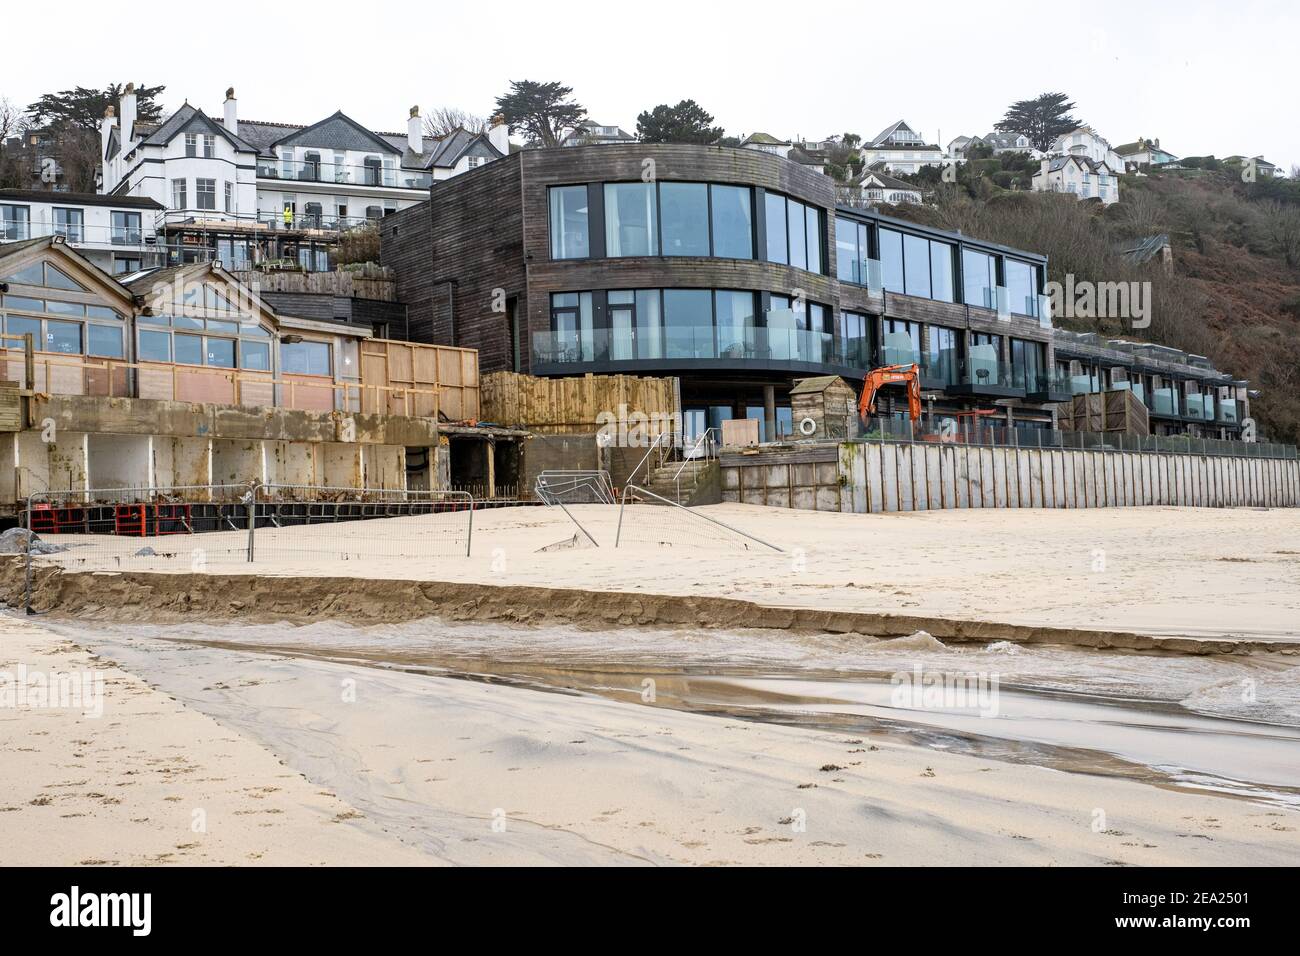 Carbis Bay hotel, restaurants and accommodation in St. Ives Cornwall, being completed ready for the G7 Summit in June 2021. Great views over the bay. Stock Photo